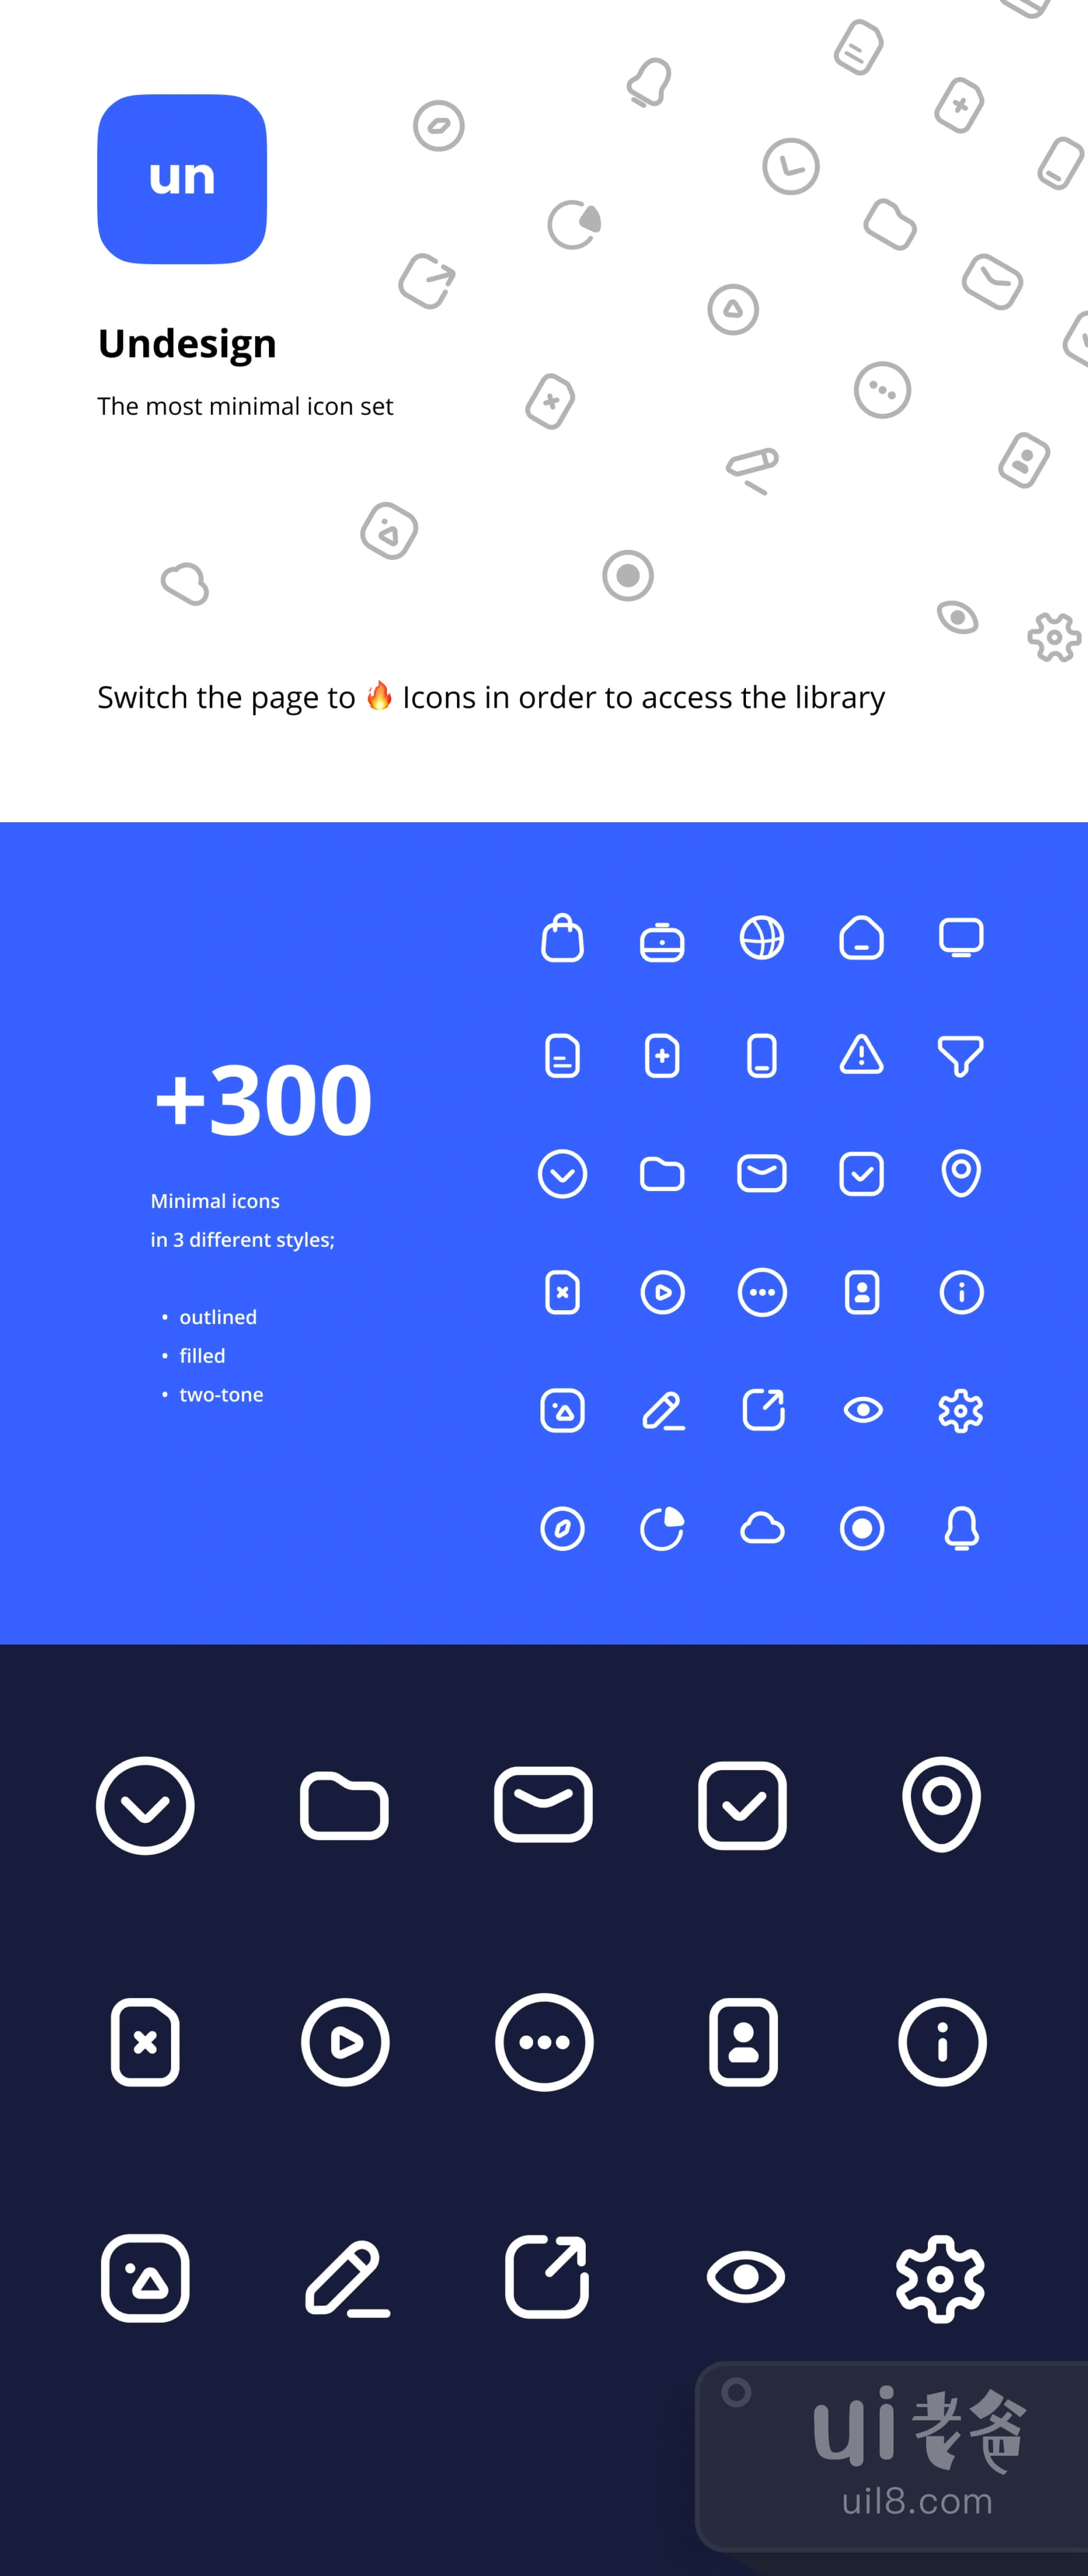 Figma的Undesign图标集 (Undesign Icon Set for Figma)插图1